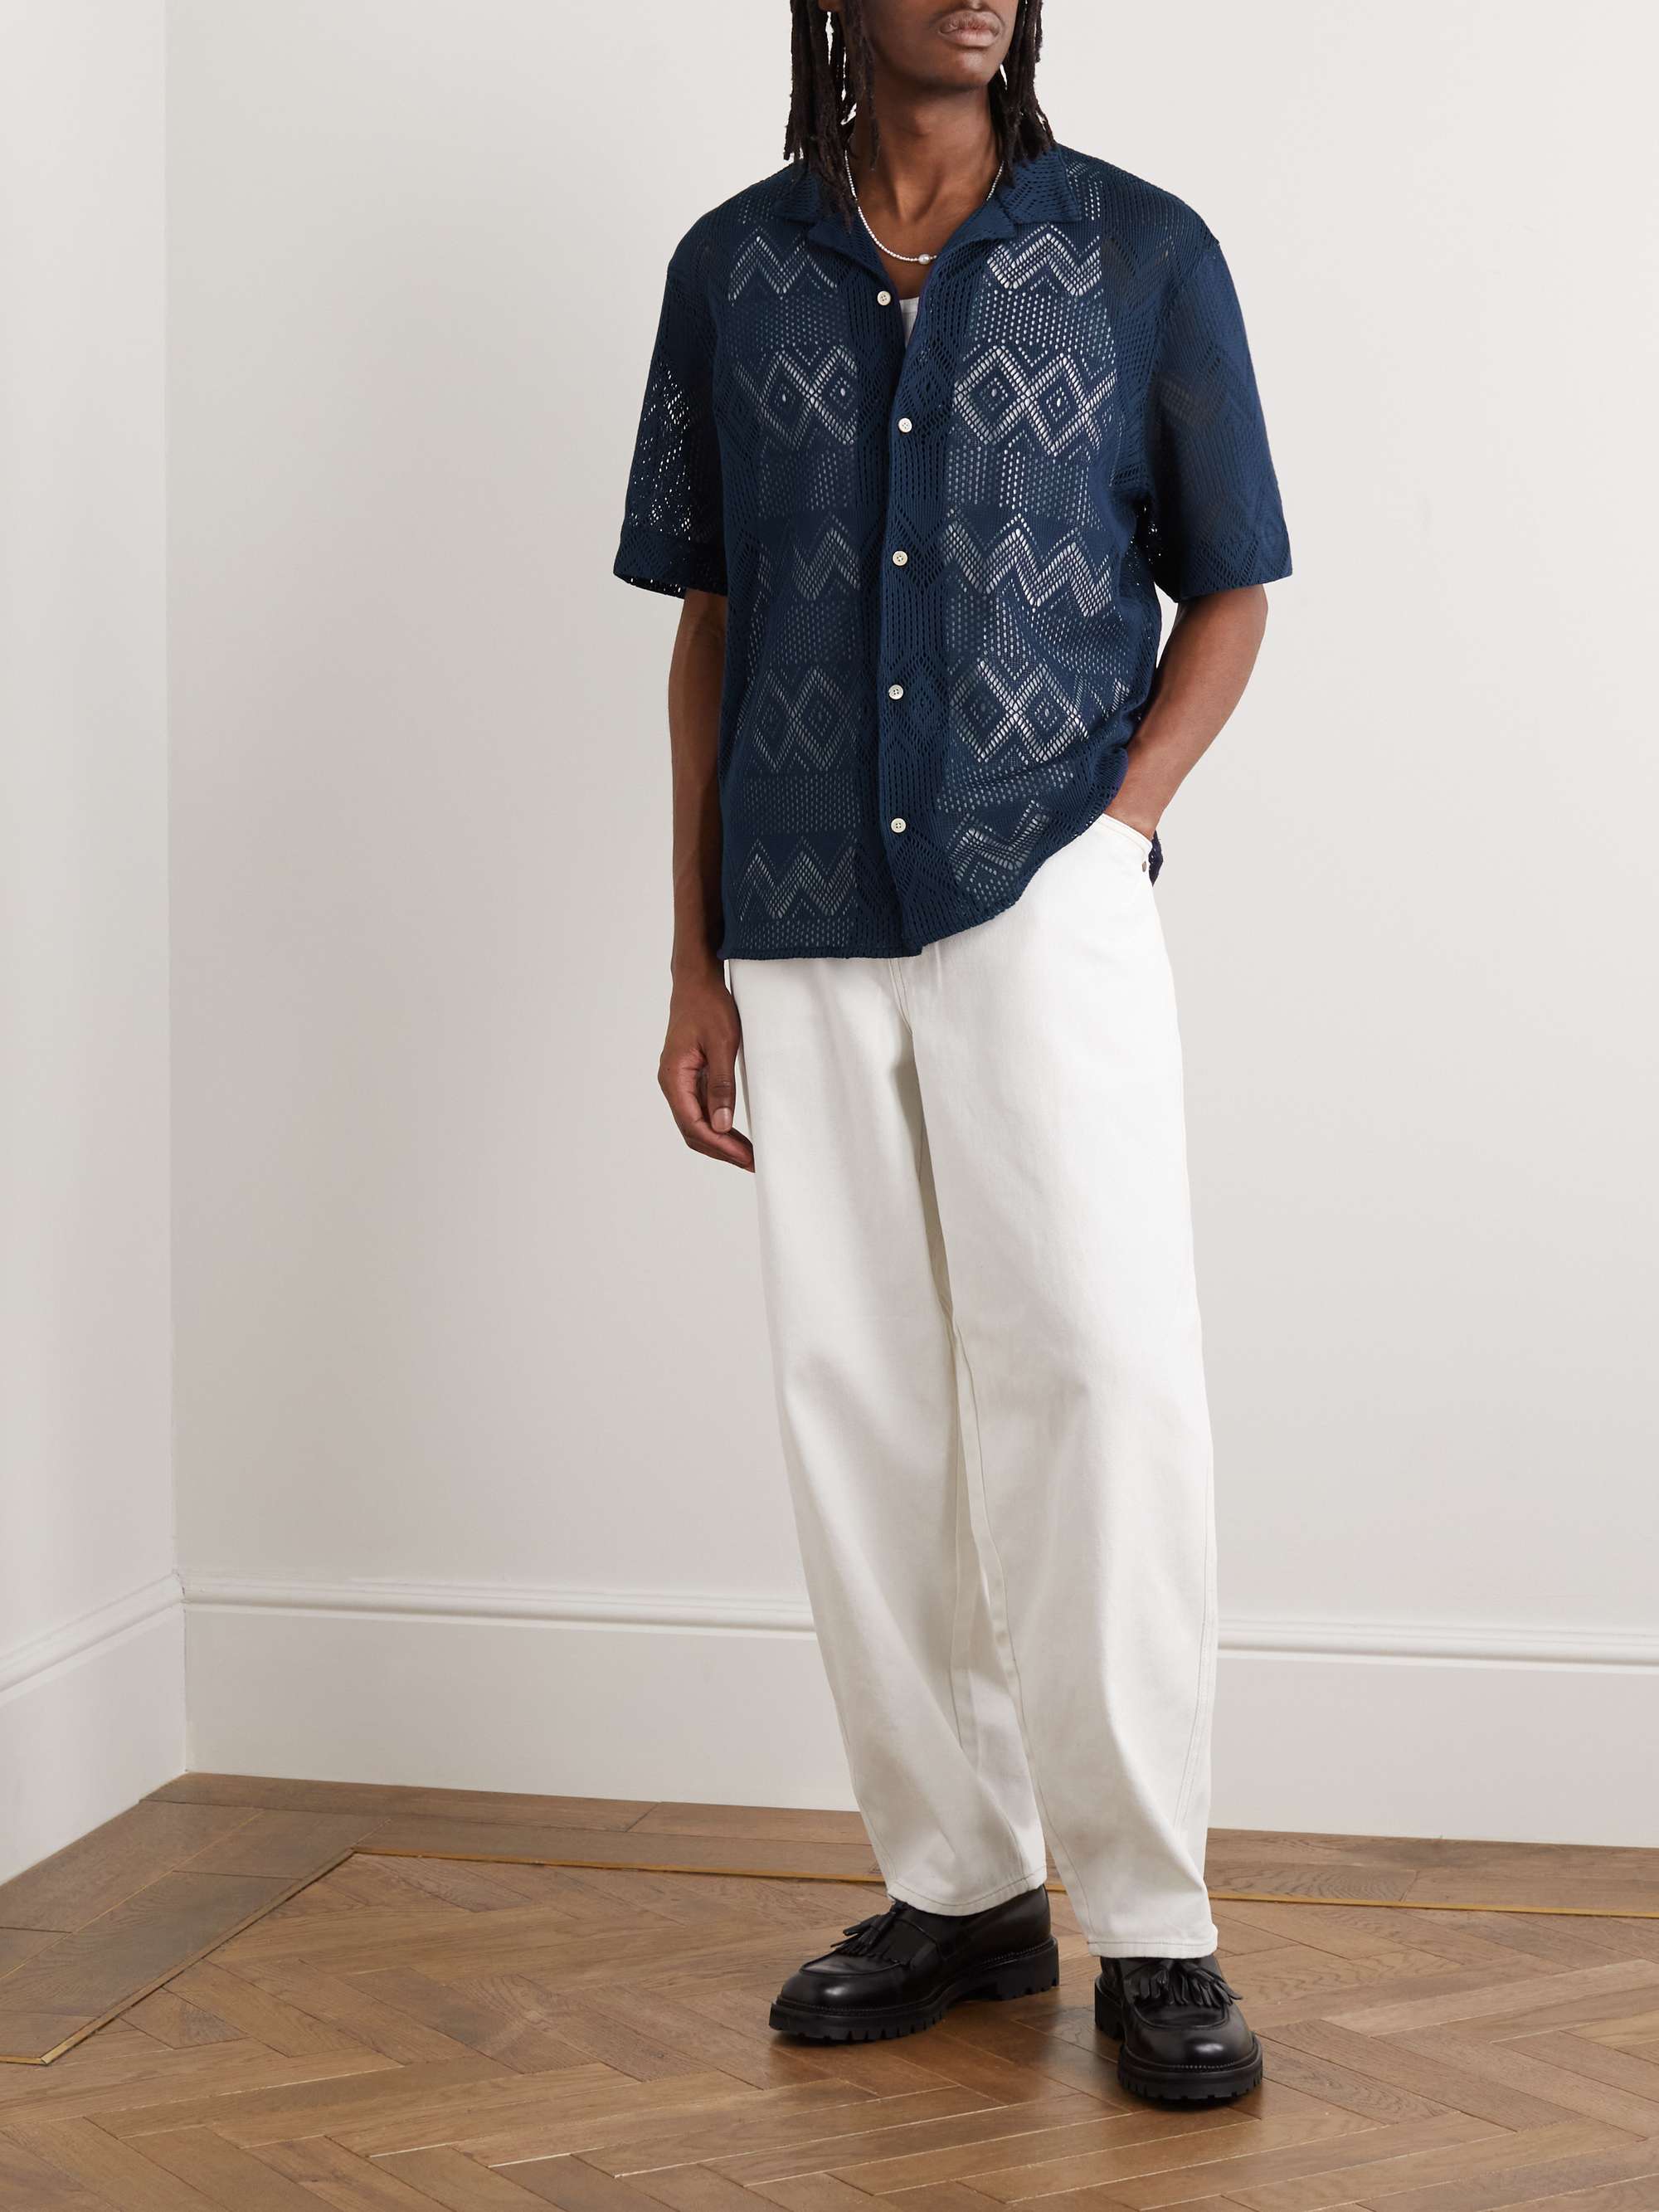 A KIND OF GUISE Gioia Camp-Collar Crocheted Cotton Shirt